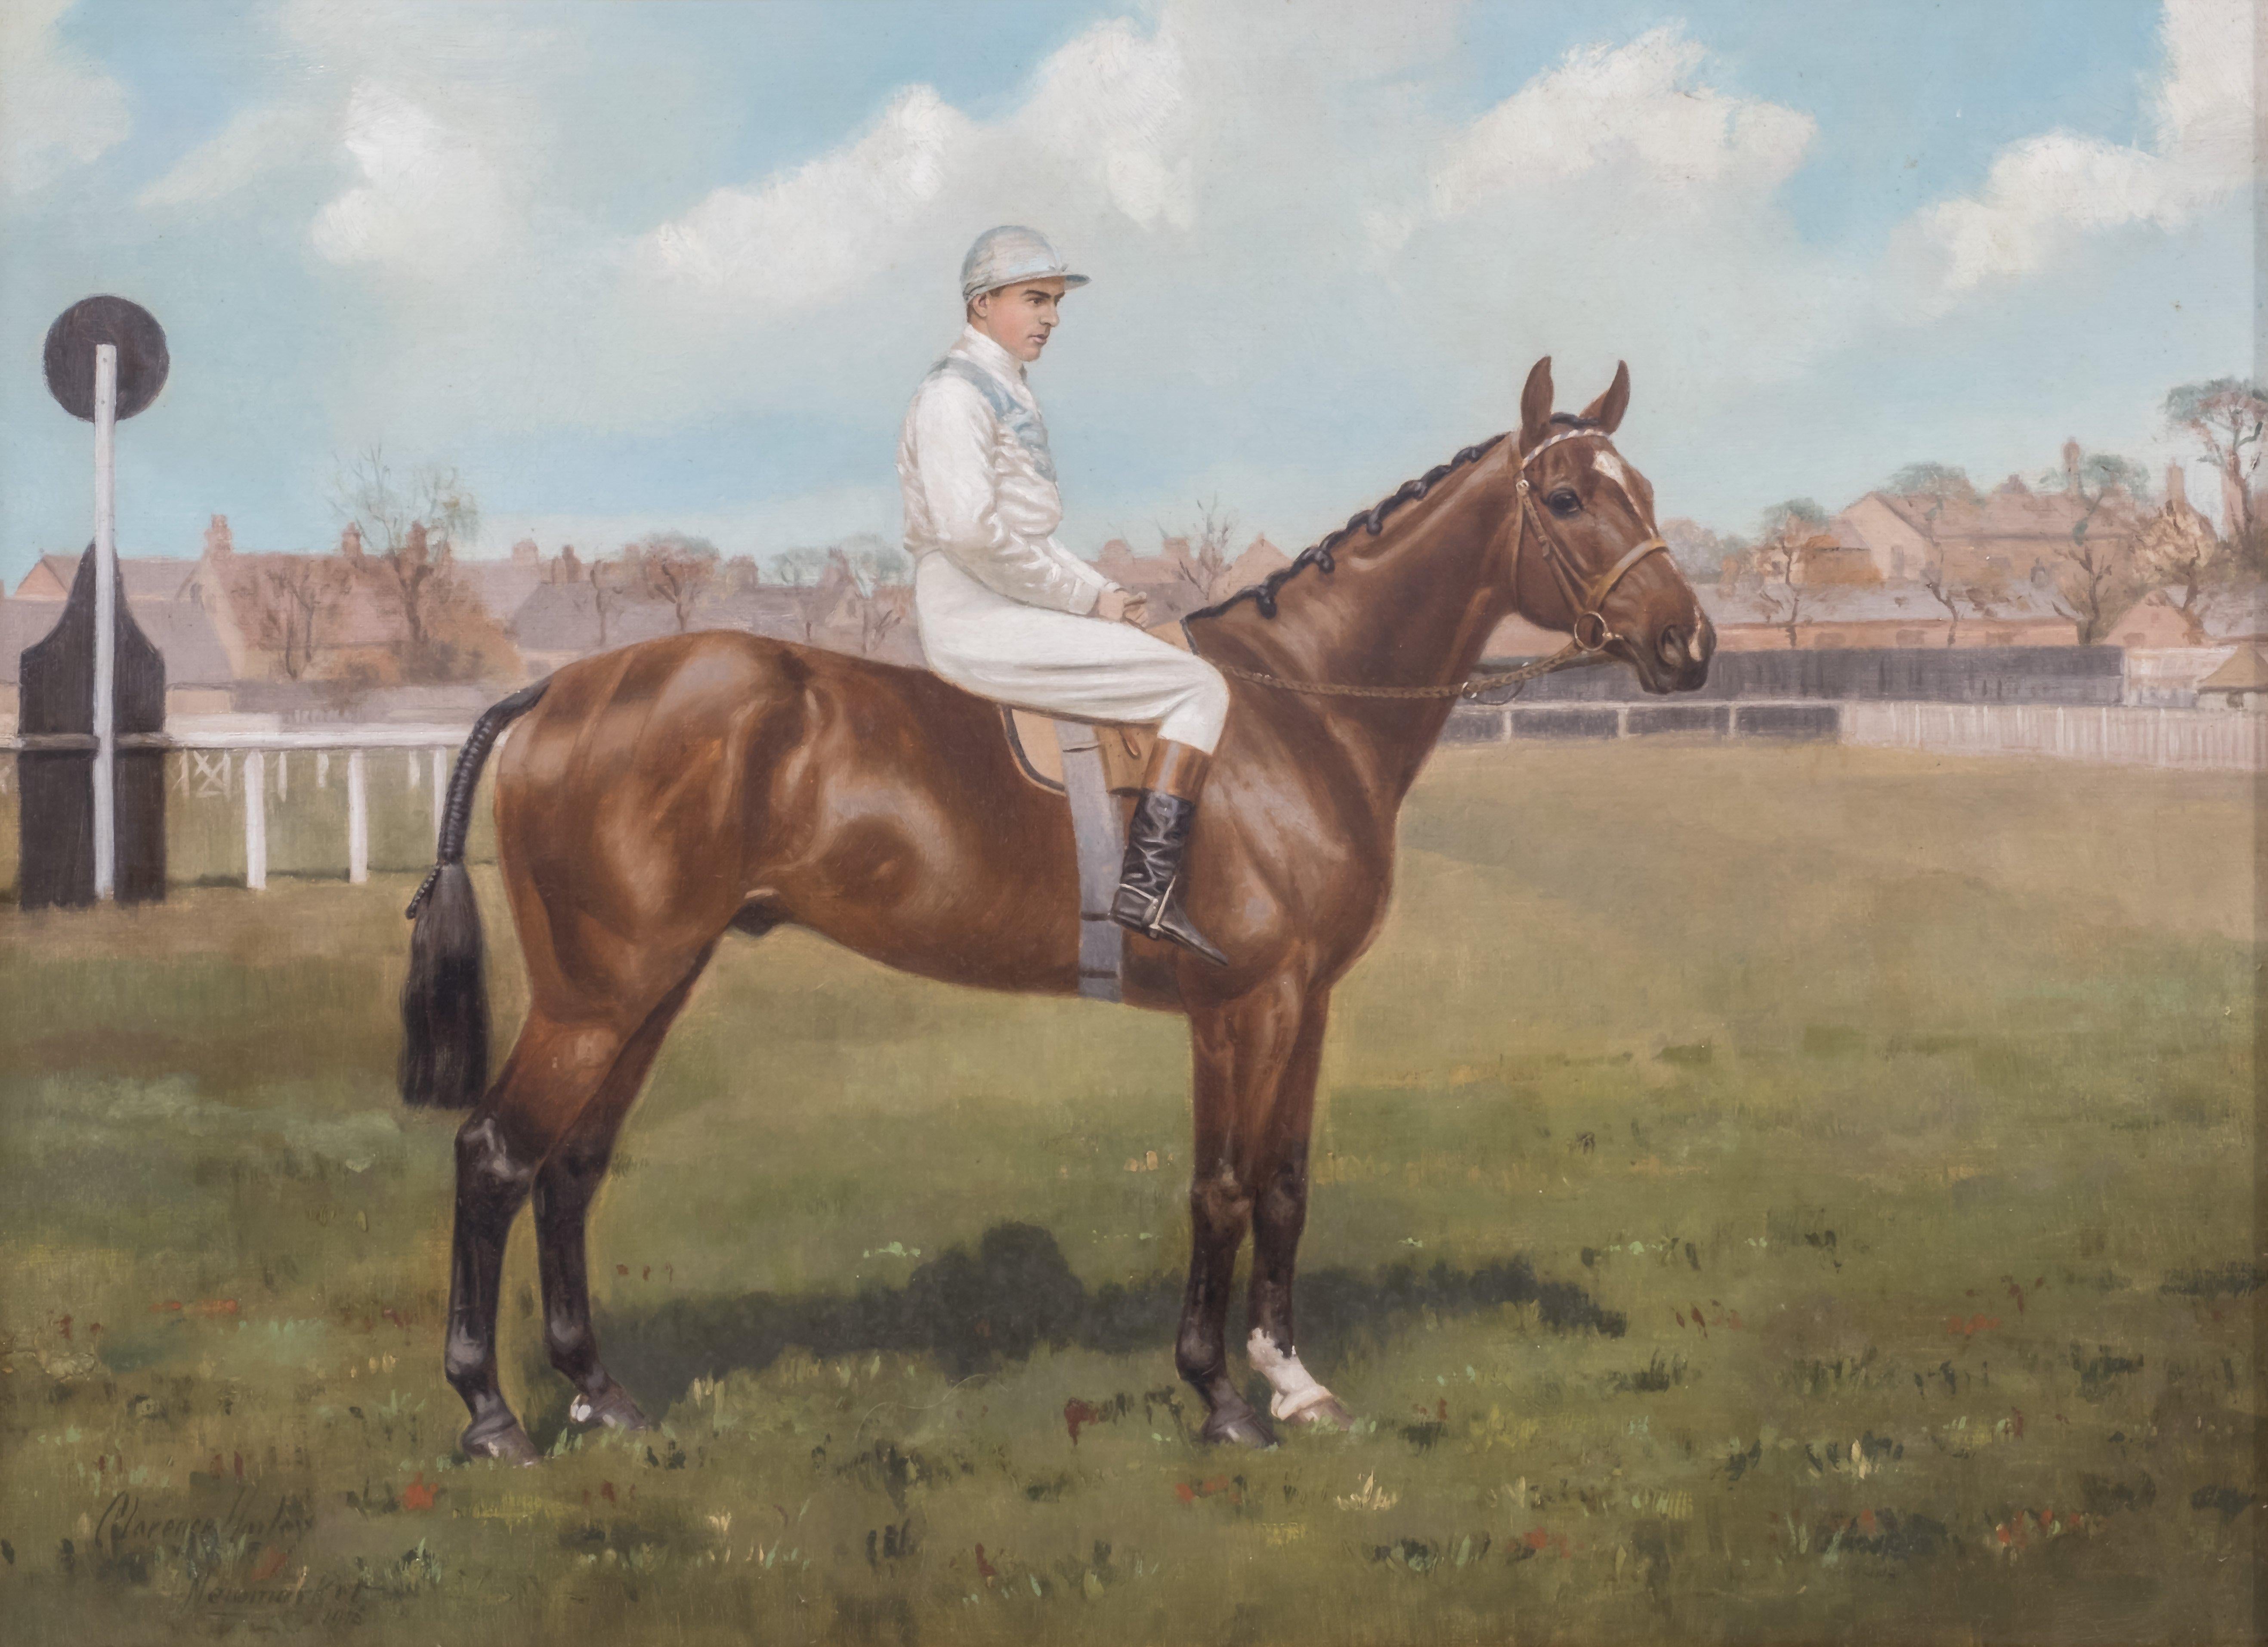 Clarence Hailey Newmarket (British born 1867-1949) famous for his painting of stallions and jockeys
Portraits of a jockey and racehorse
Newmarket, Suffolk, England, Signed left corner. One of them dated 1915.

Dimensions:
51 x 70 x 2 cm (each